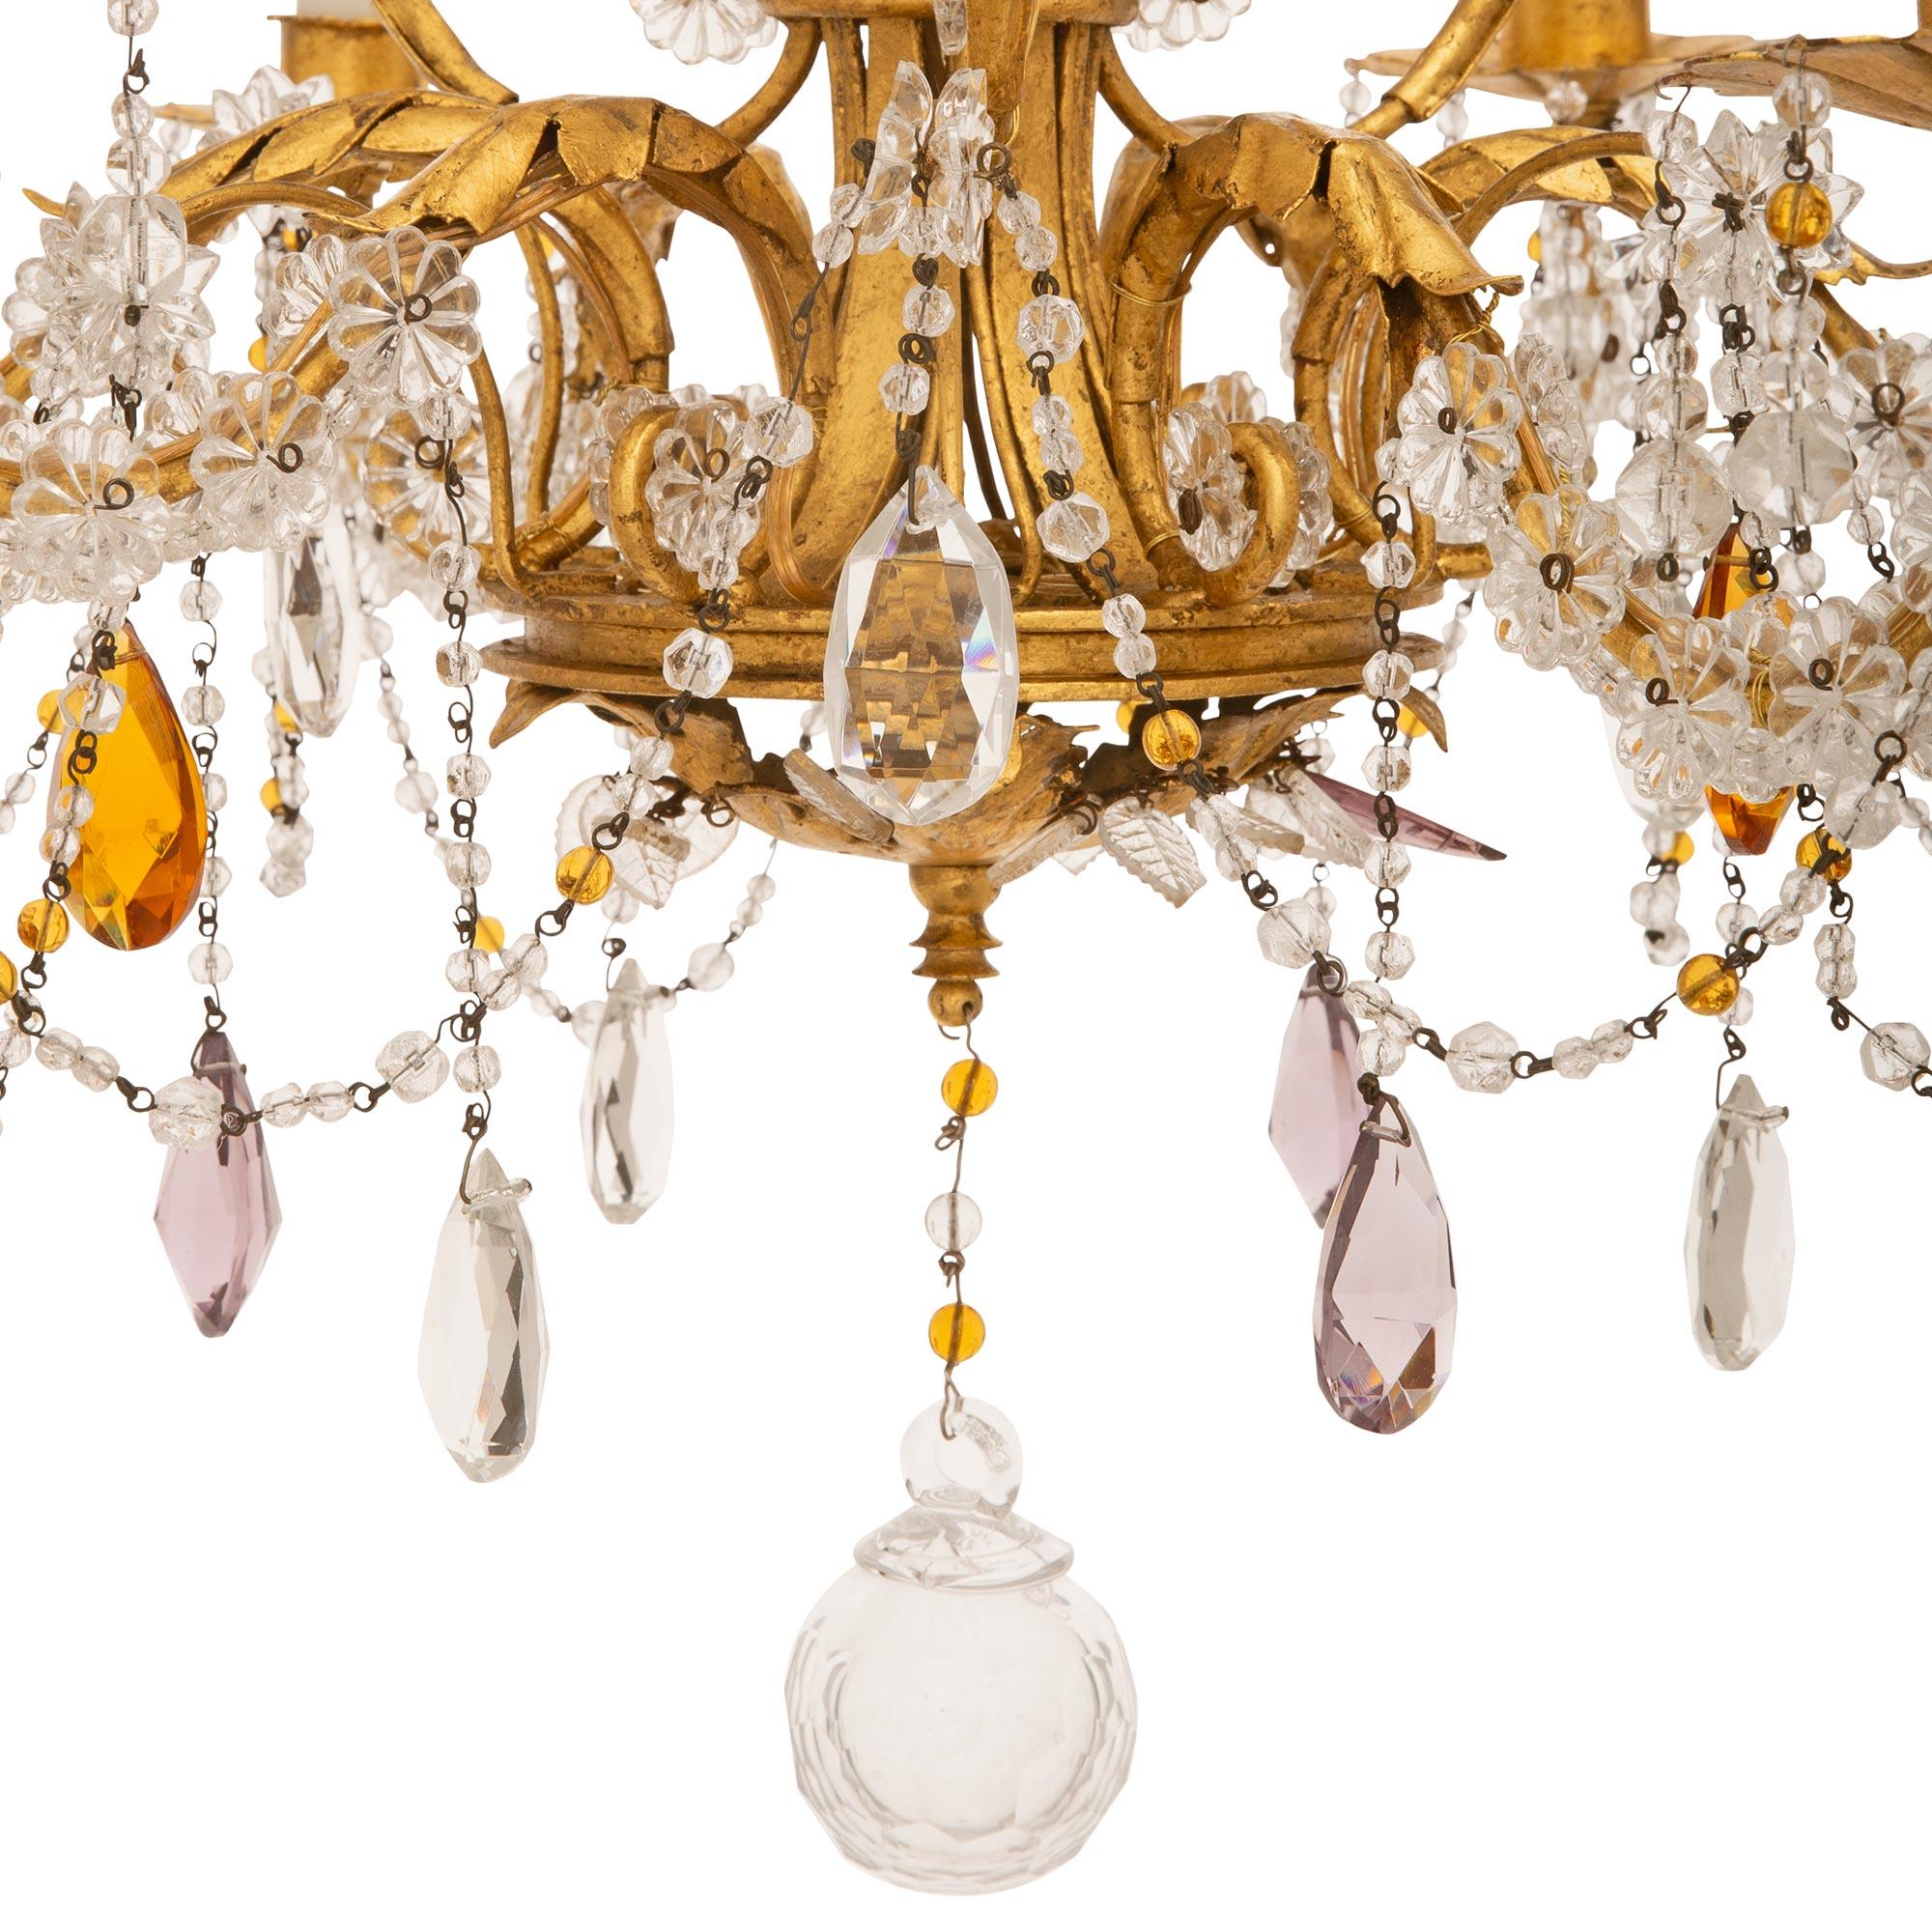 French Turn Of The Century Louis XV St. Gilt Metal & Baccarat Crystal Chandelier For Sale 4